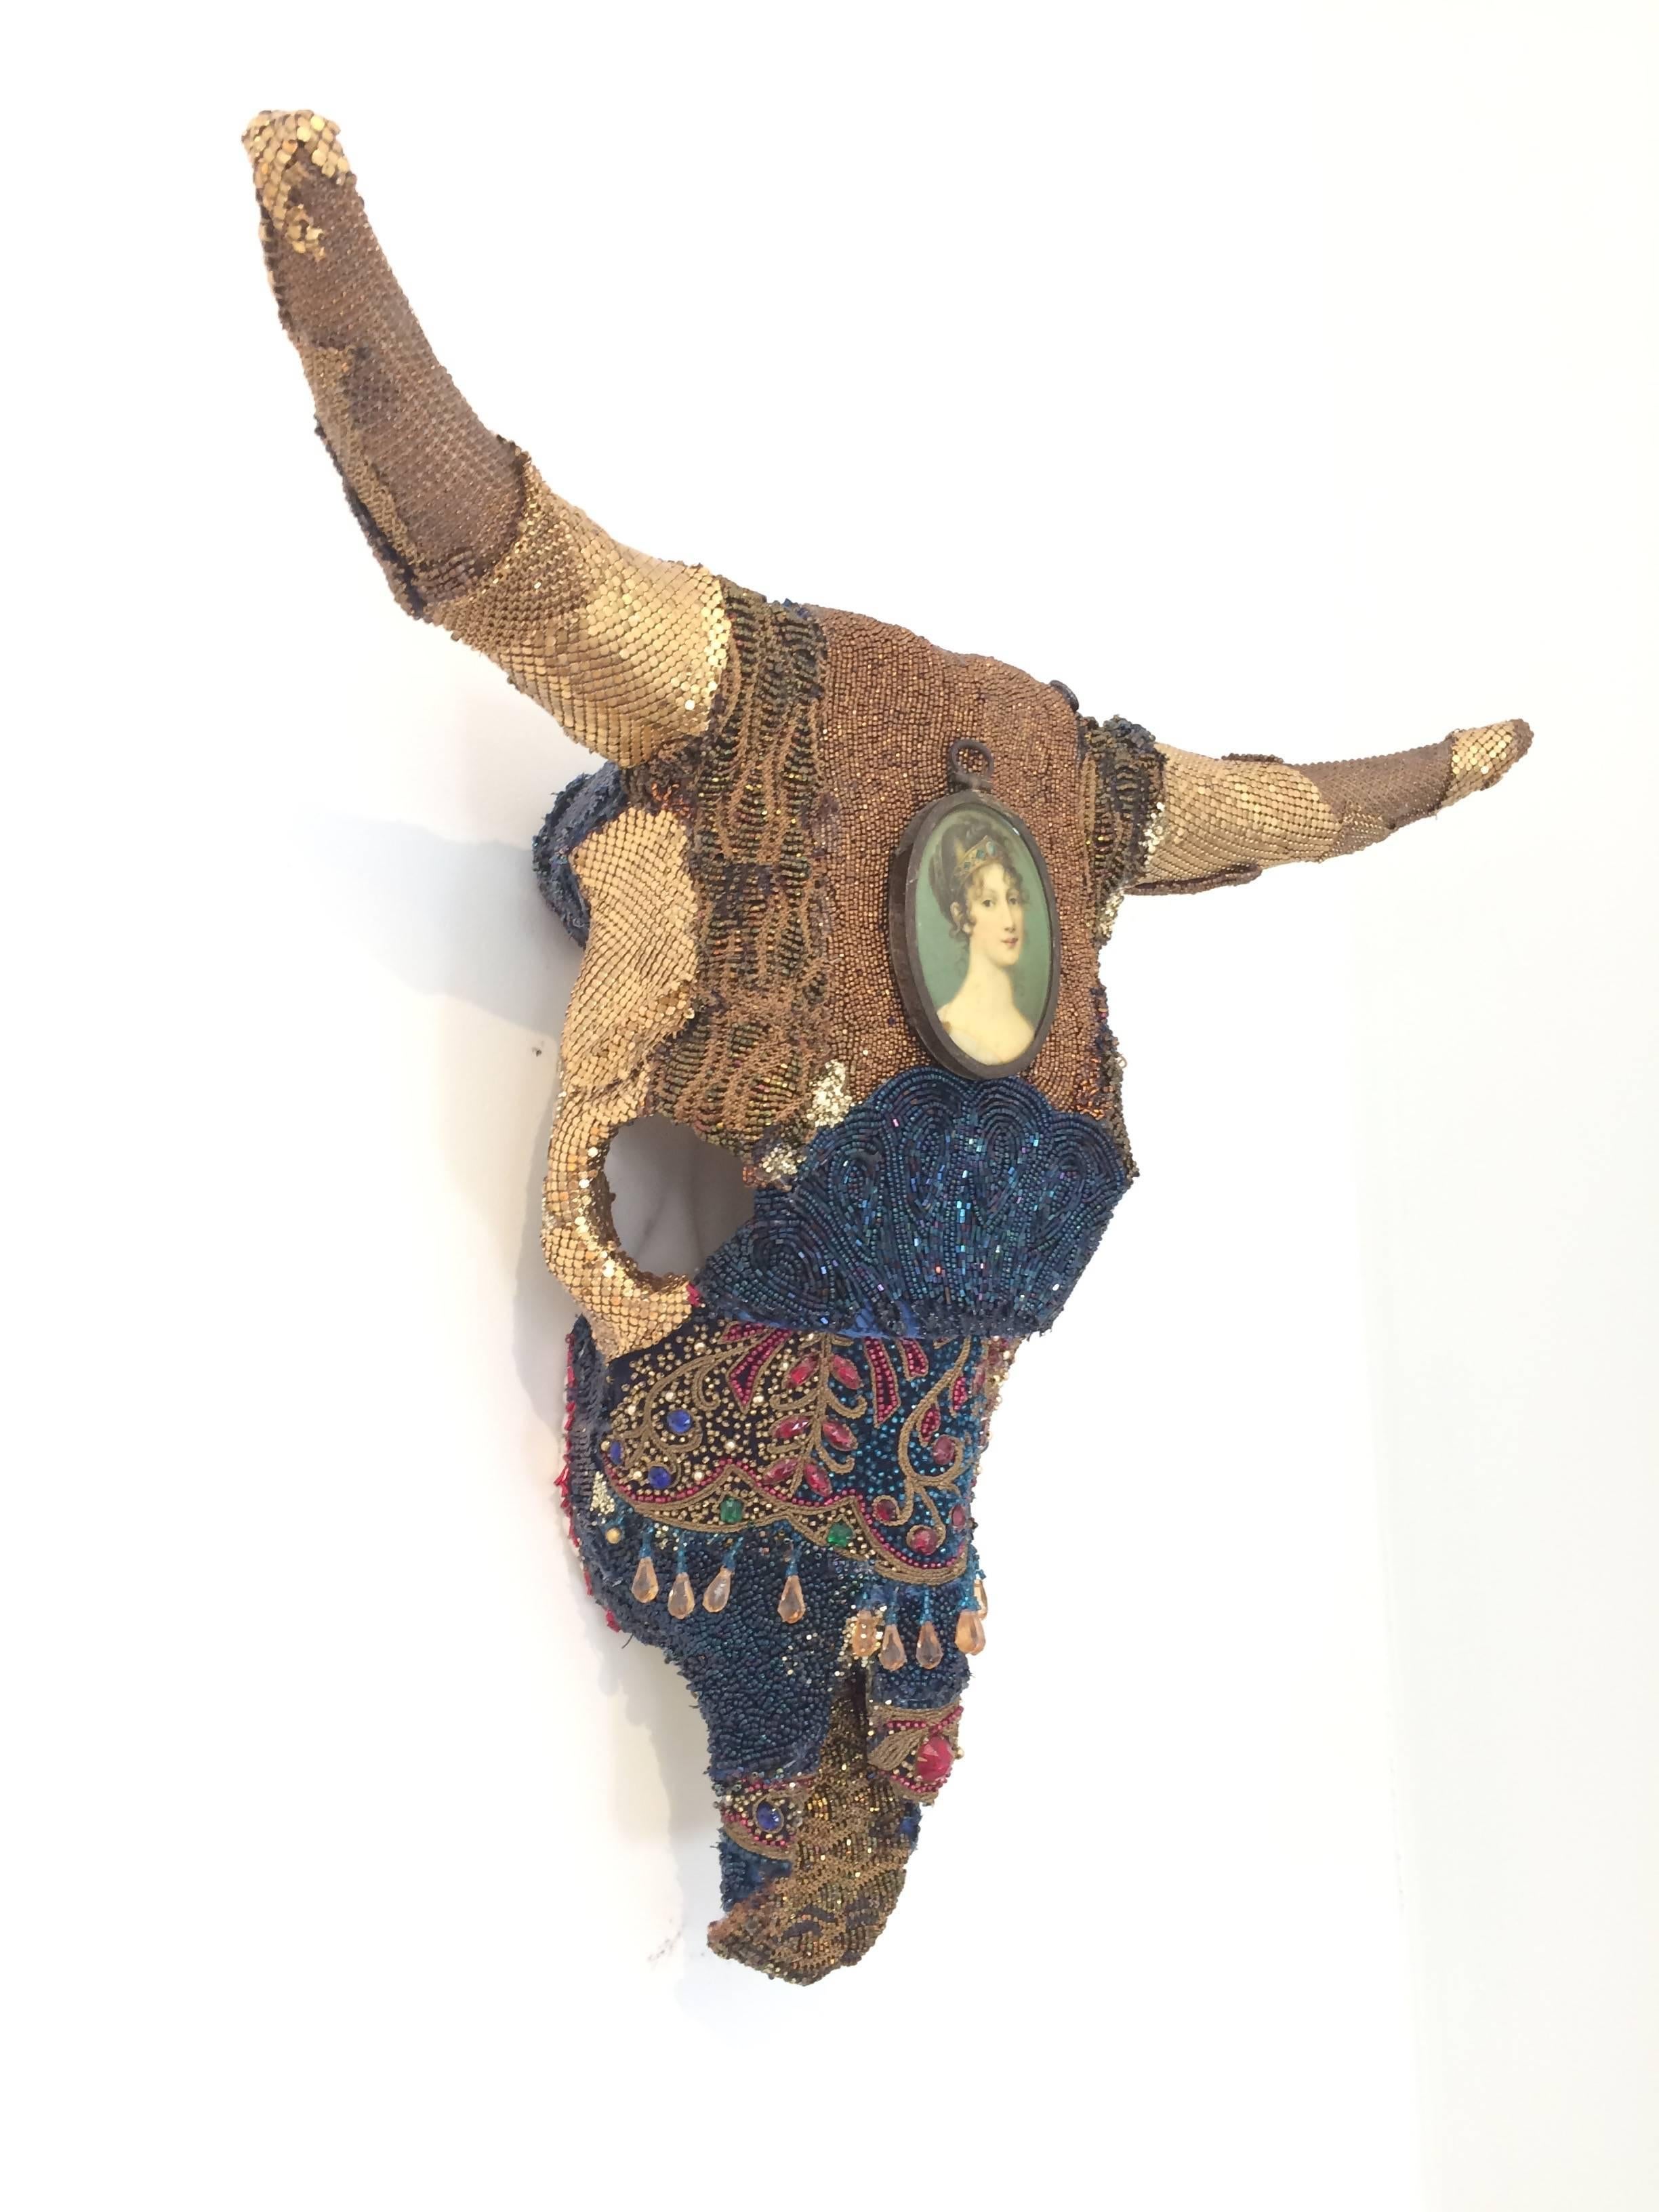 Magnificent gem of a wall sculpture in the shape of a skull, incrusted with layers of beading from vintage remnants, gold lame antique purses, a lovely painted miniature, and other treasures.